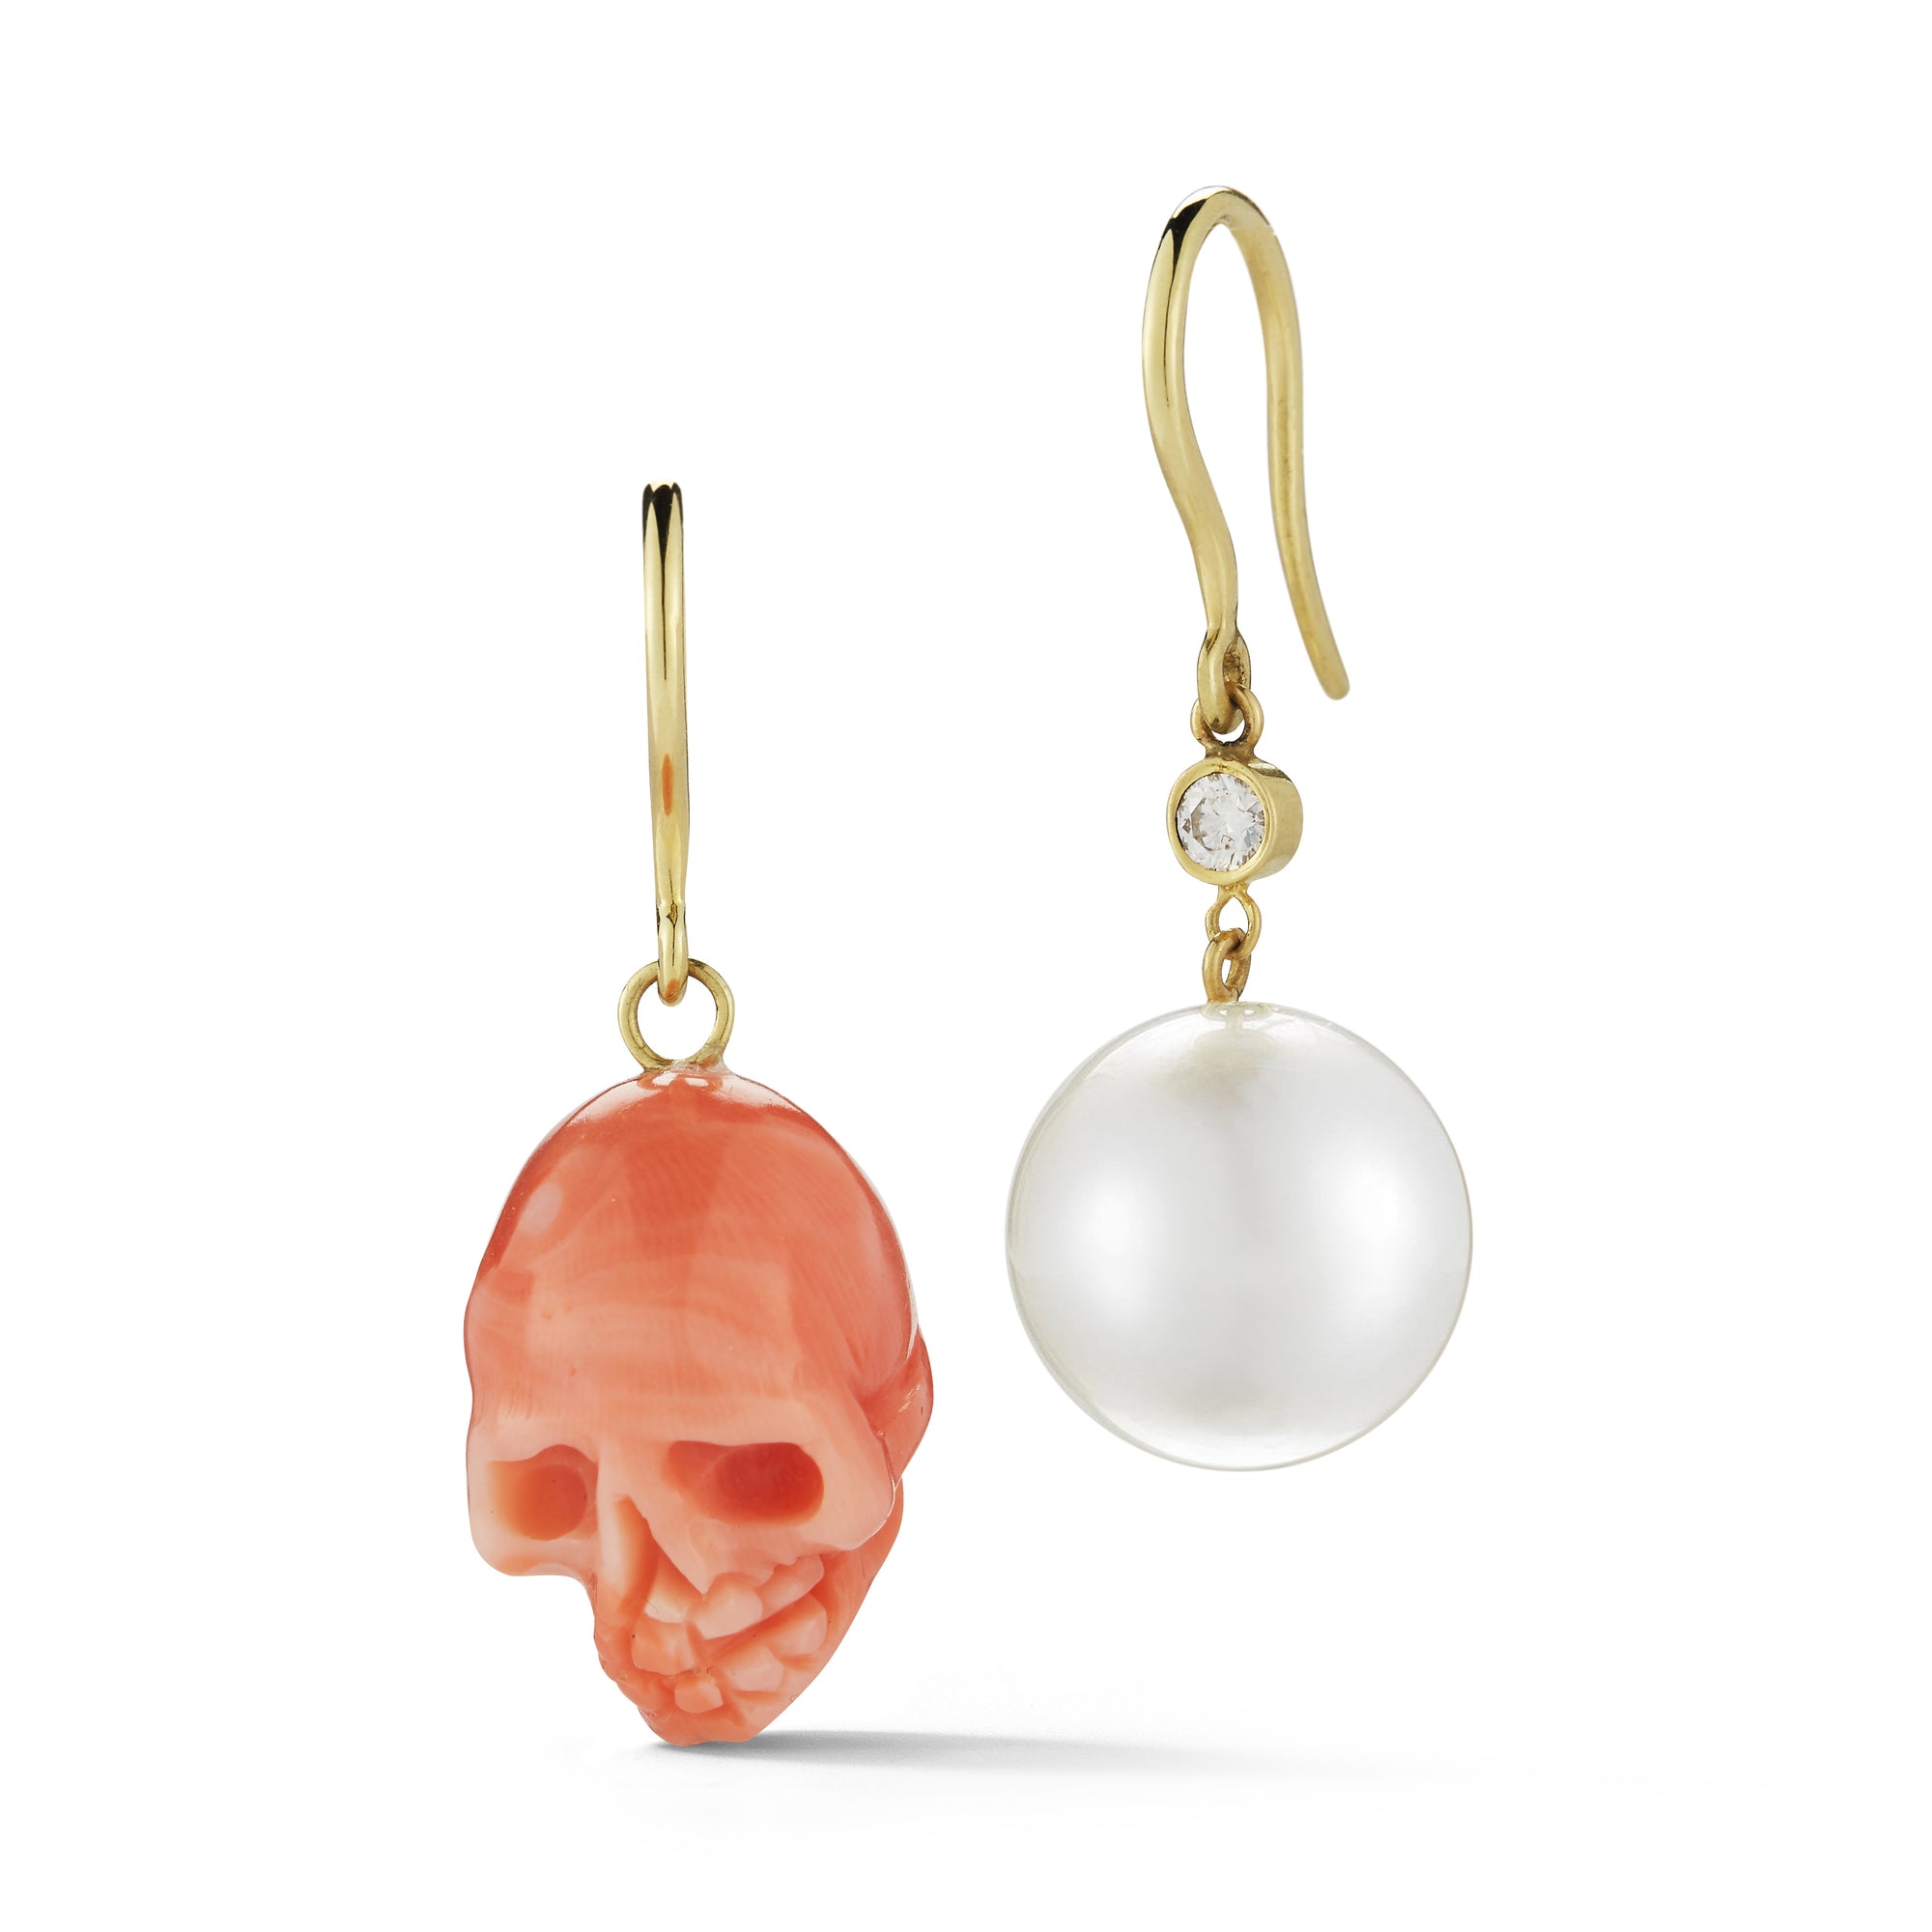 mismatched funky edgy coral red skull and pearl earring set in 18k gold by finn by candice pool neistat